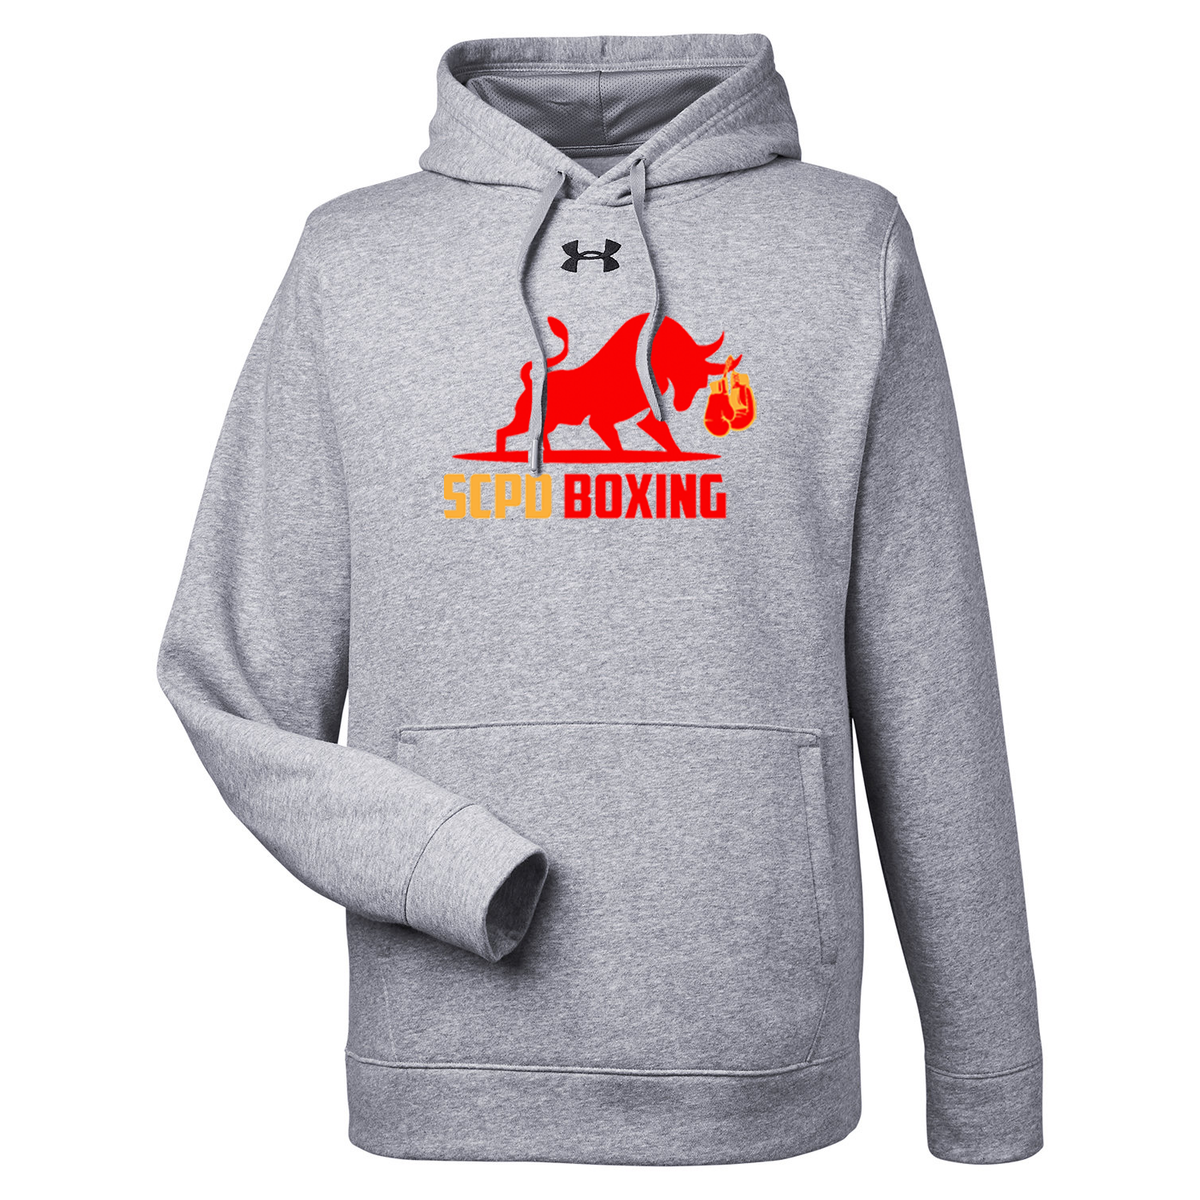 SCPD Boxing Under Armour Men's Hustle Pullover Hooded Sweatshirt